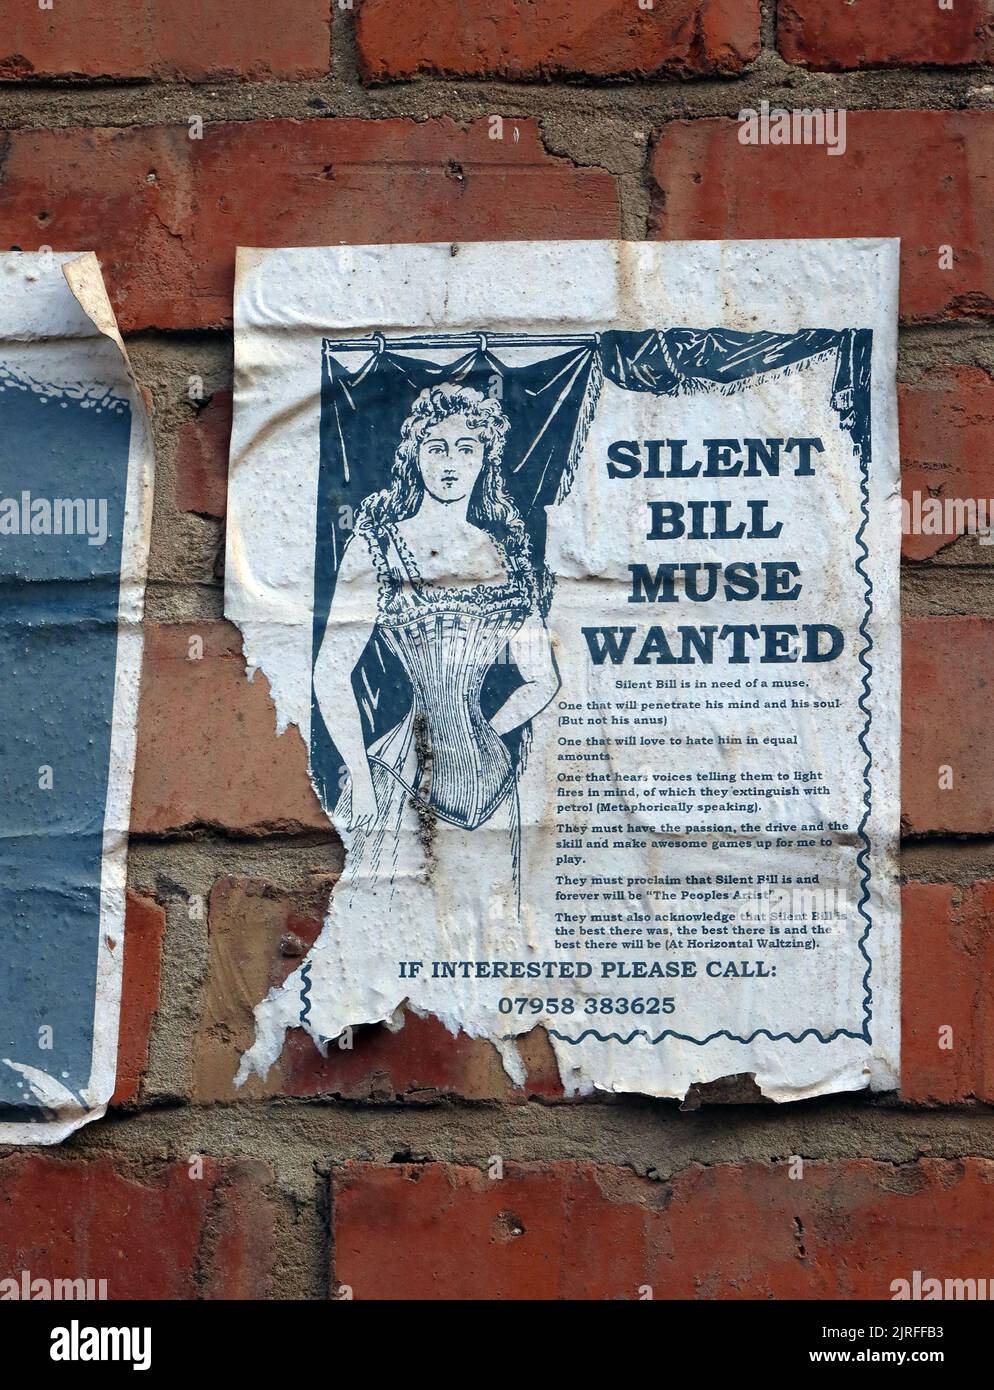 Silent Bill Muse, Wanted - 07958-383625, Deansgate, Blackpool , Lancs, Angleterre, FY1 1BN Banque D'Images